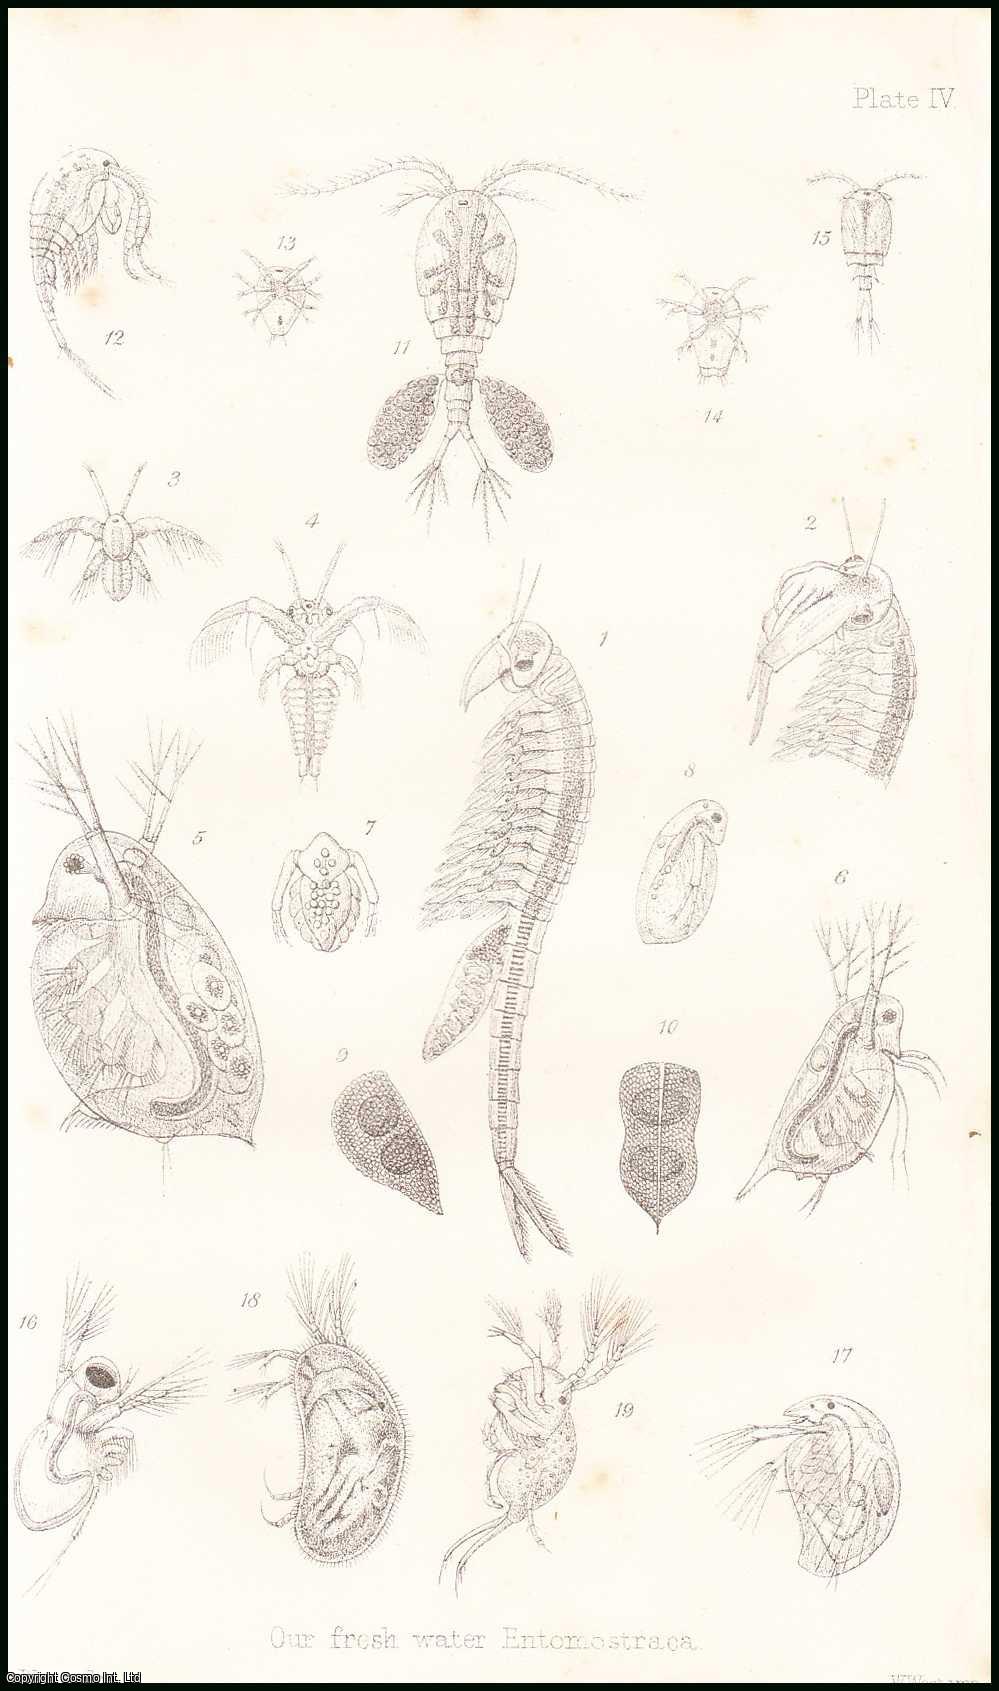 W. Baird, M.D., F.L.S. - Our Freshwater Entomostraca, Shell-Insects, or Water-Fleas. An uncommon original article from the Popular Science Review 1867.